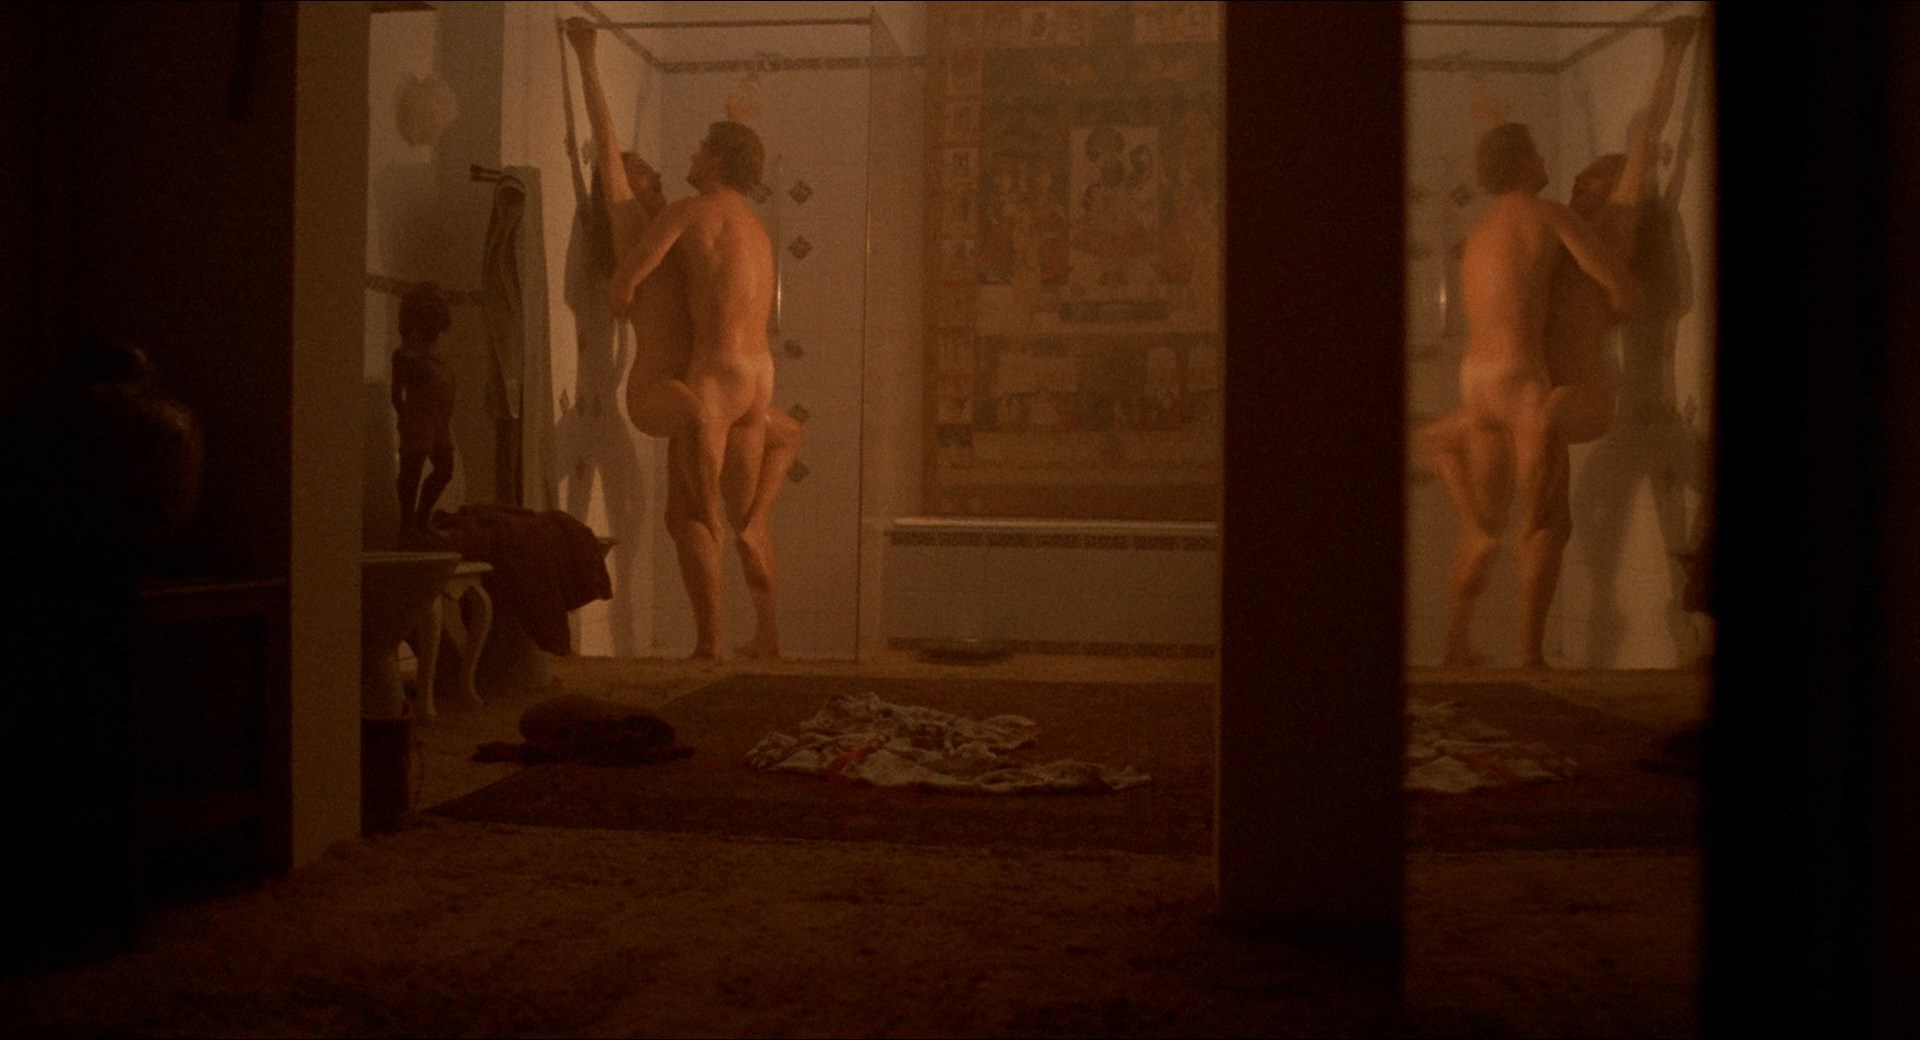 Melissa Leo is banging some guy in the shower.